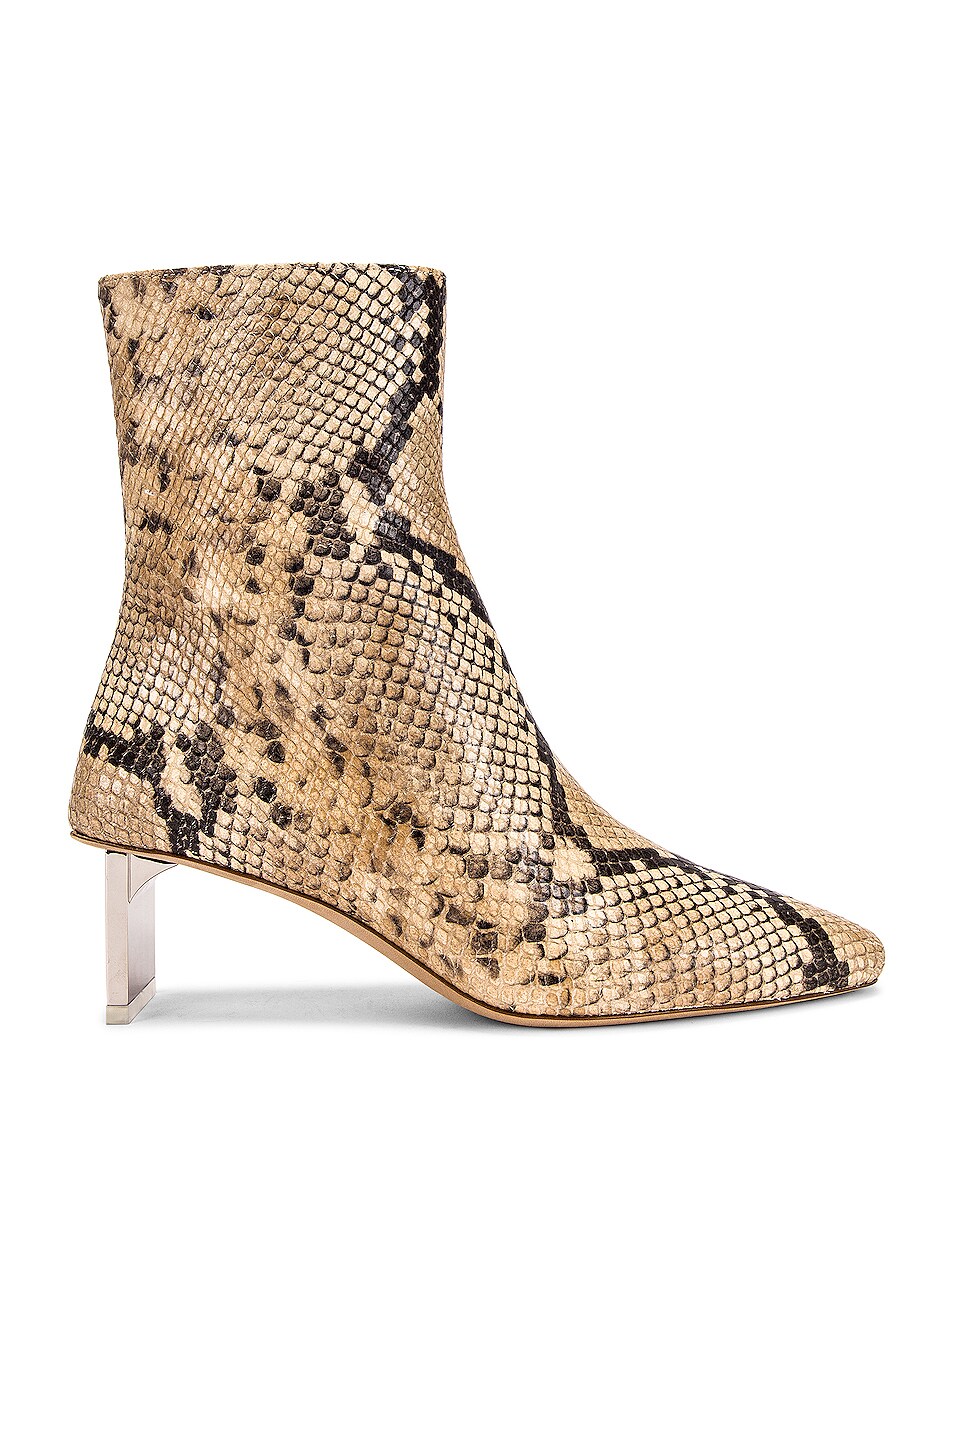 Image 1 of Arielle Baron Serra Boot in Sand Printed Python